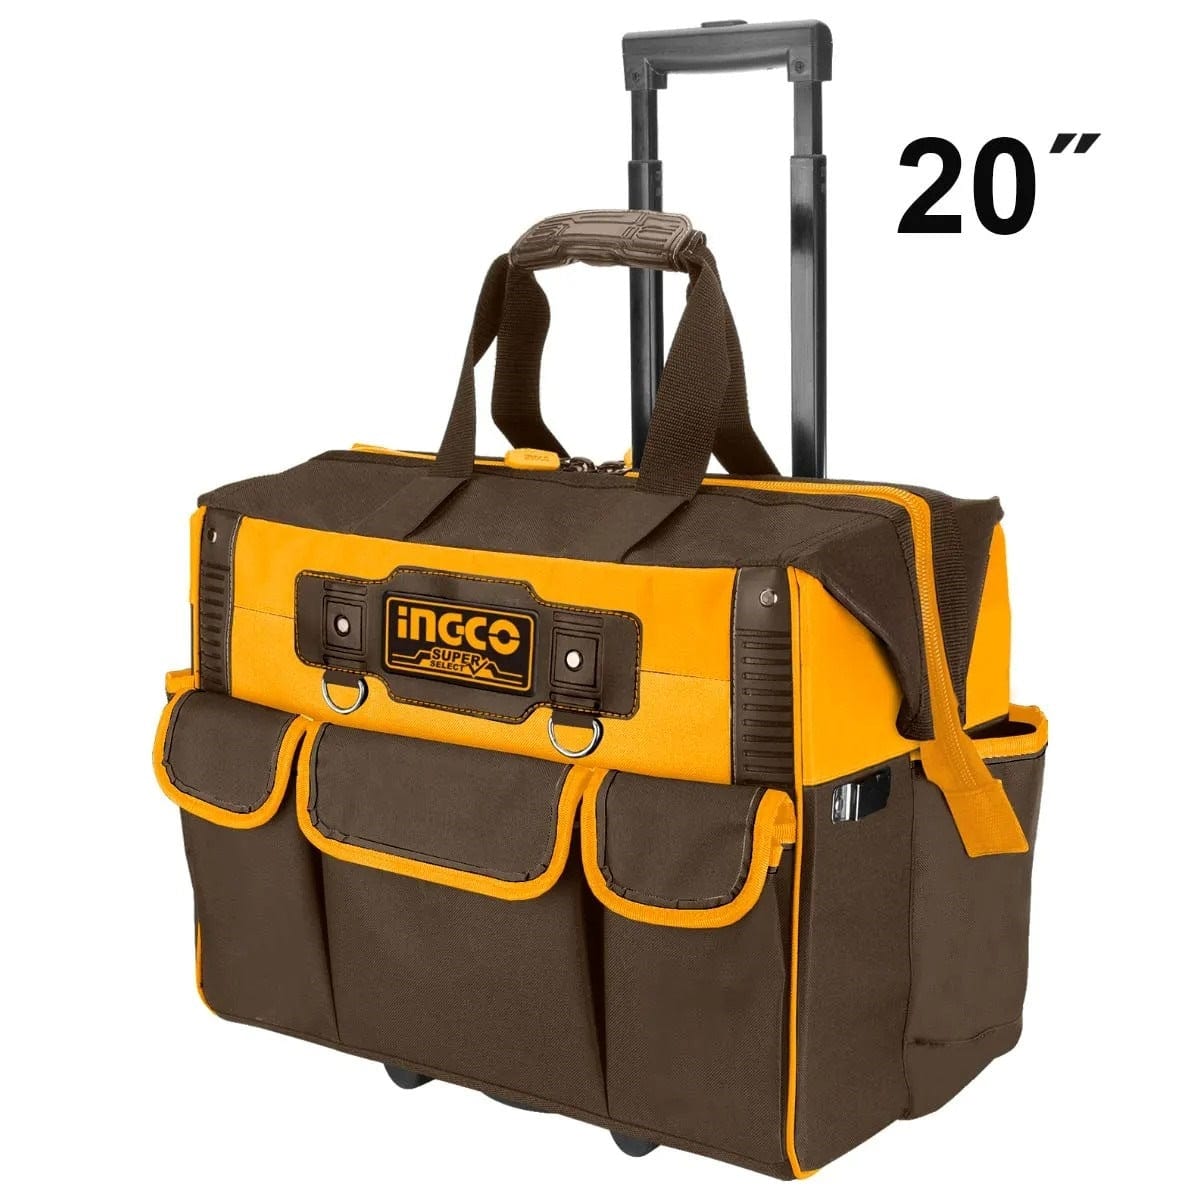 Ingco Tool Bag 13" - HTBG281328 | Accra, Ghana | Supply Master Tool Boxes Bags & Belts Buy Tools hardware Building materials